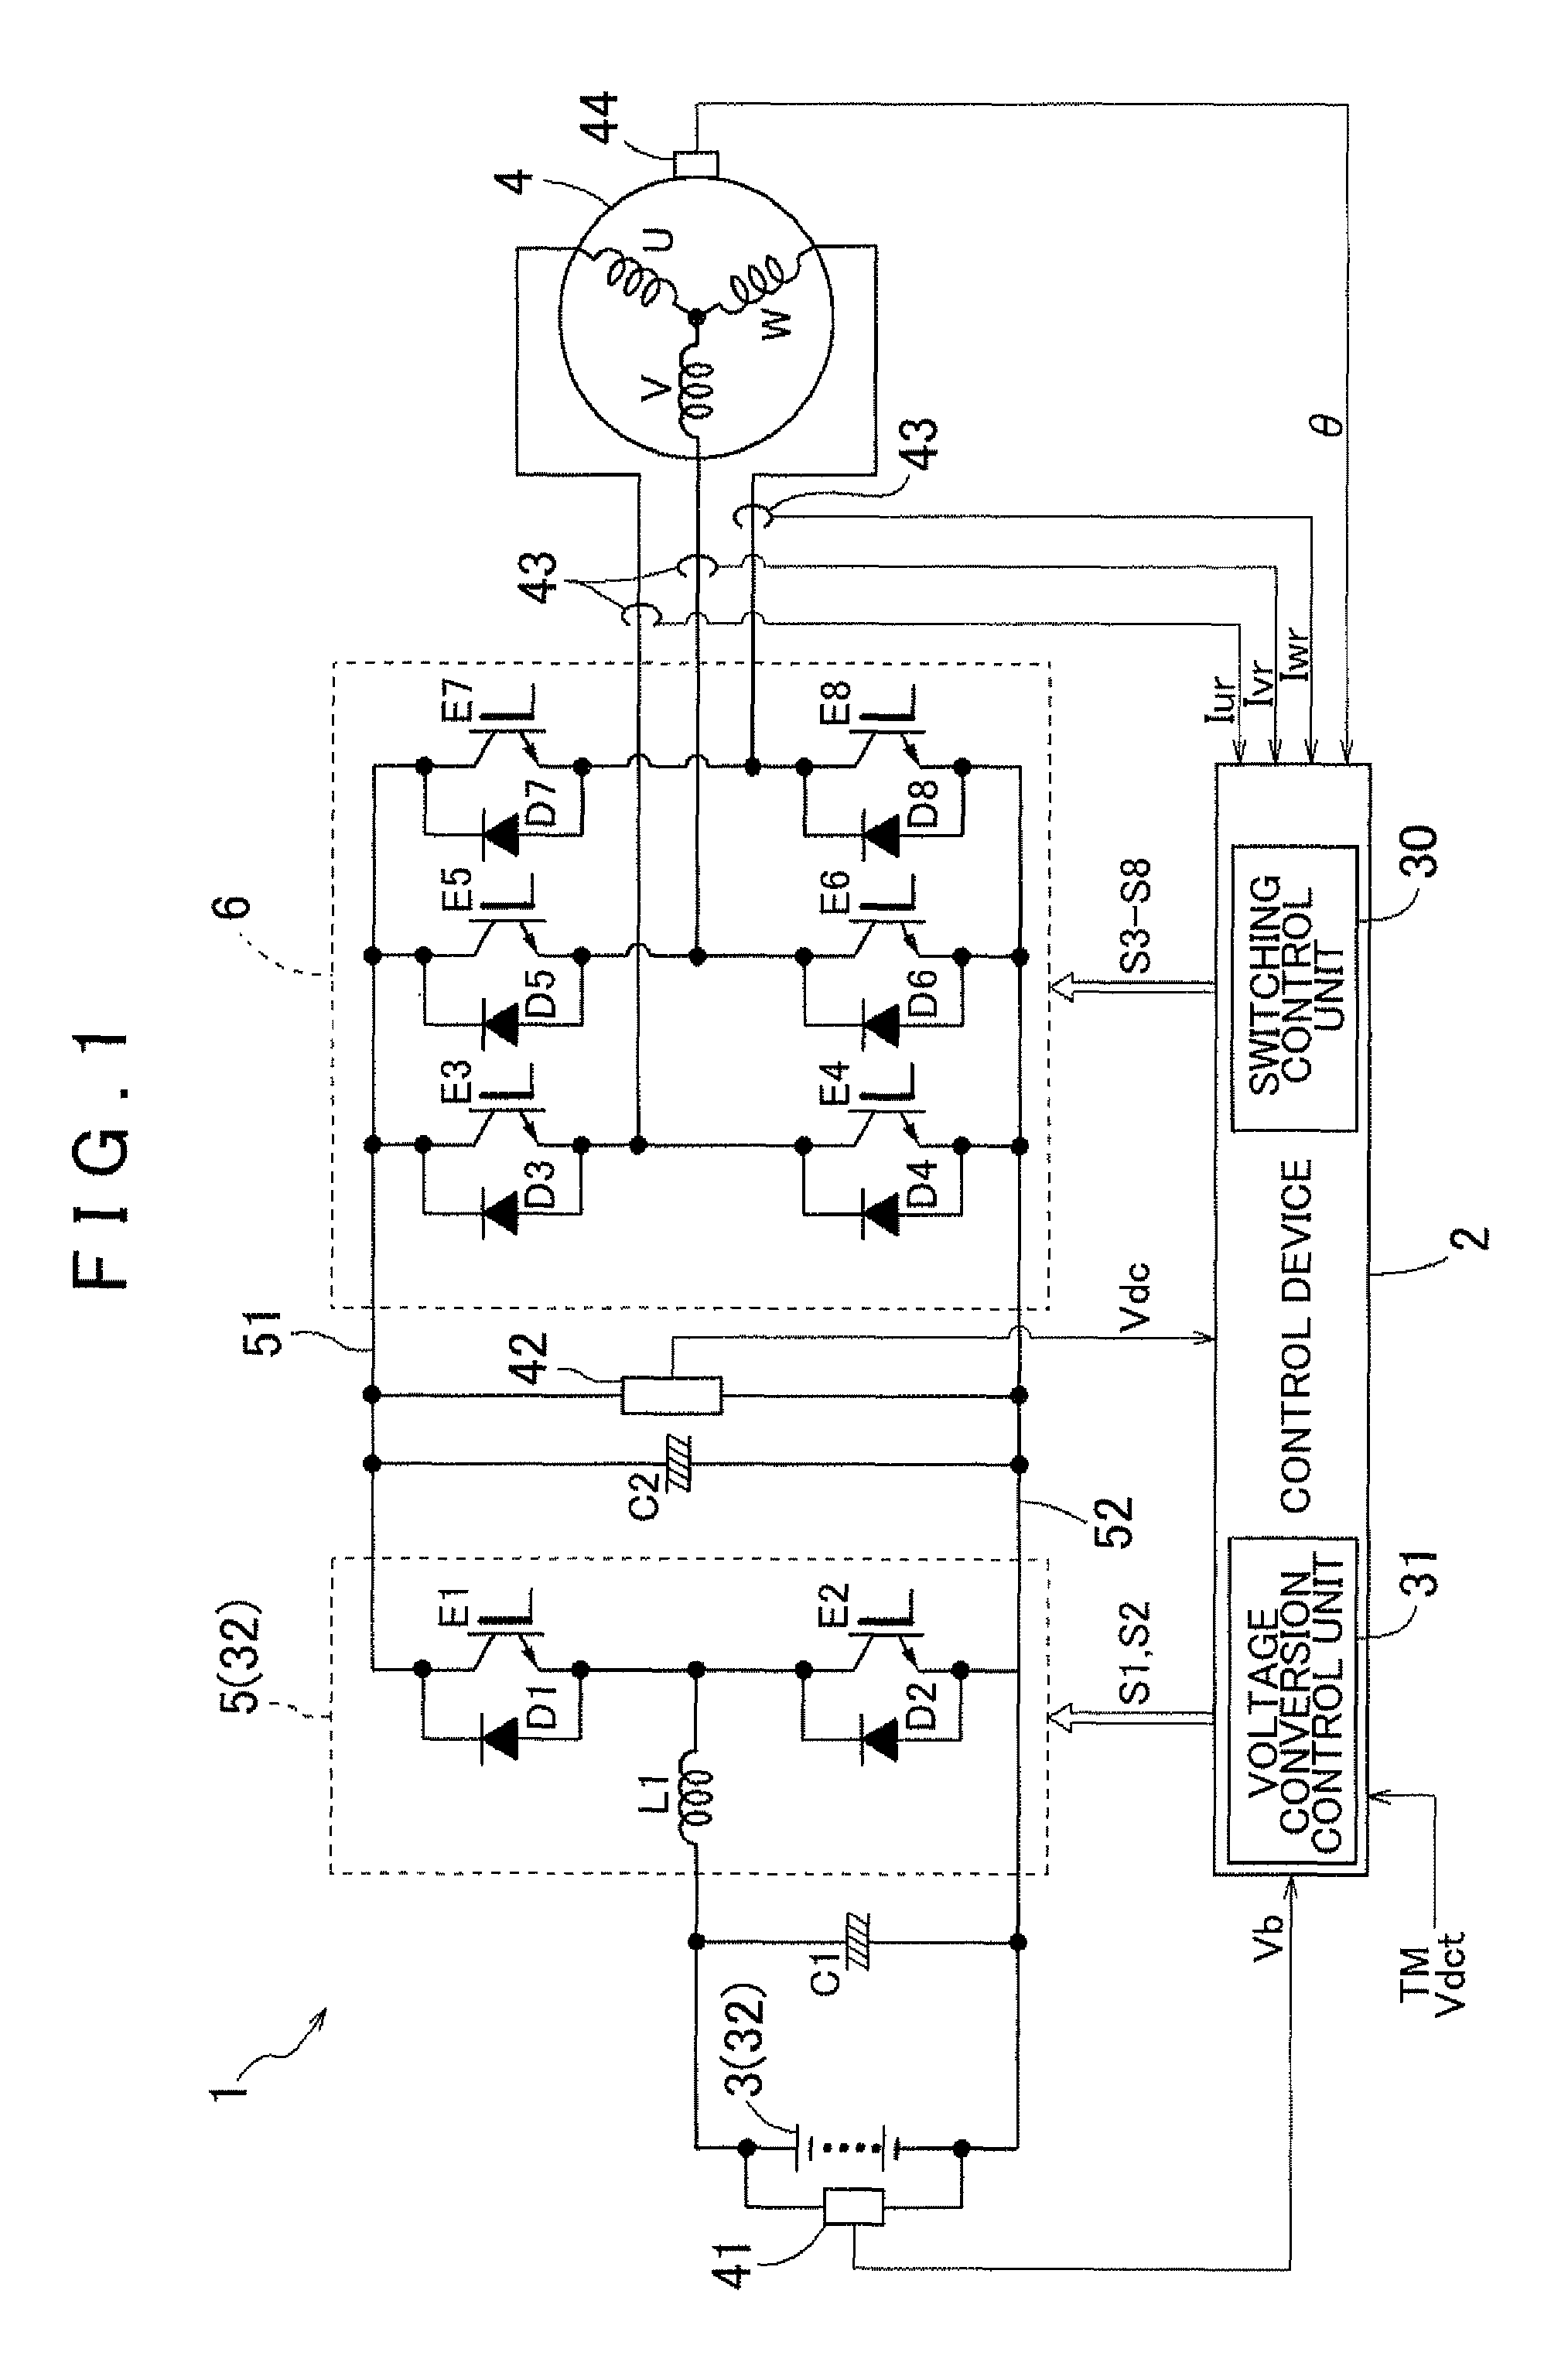 Control device for electric motor driving apparatus